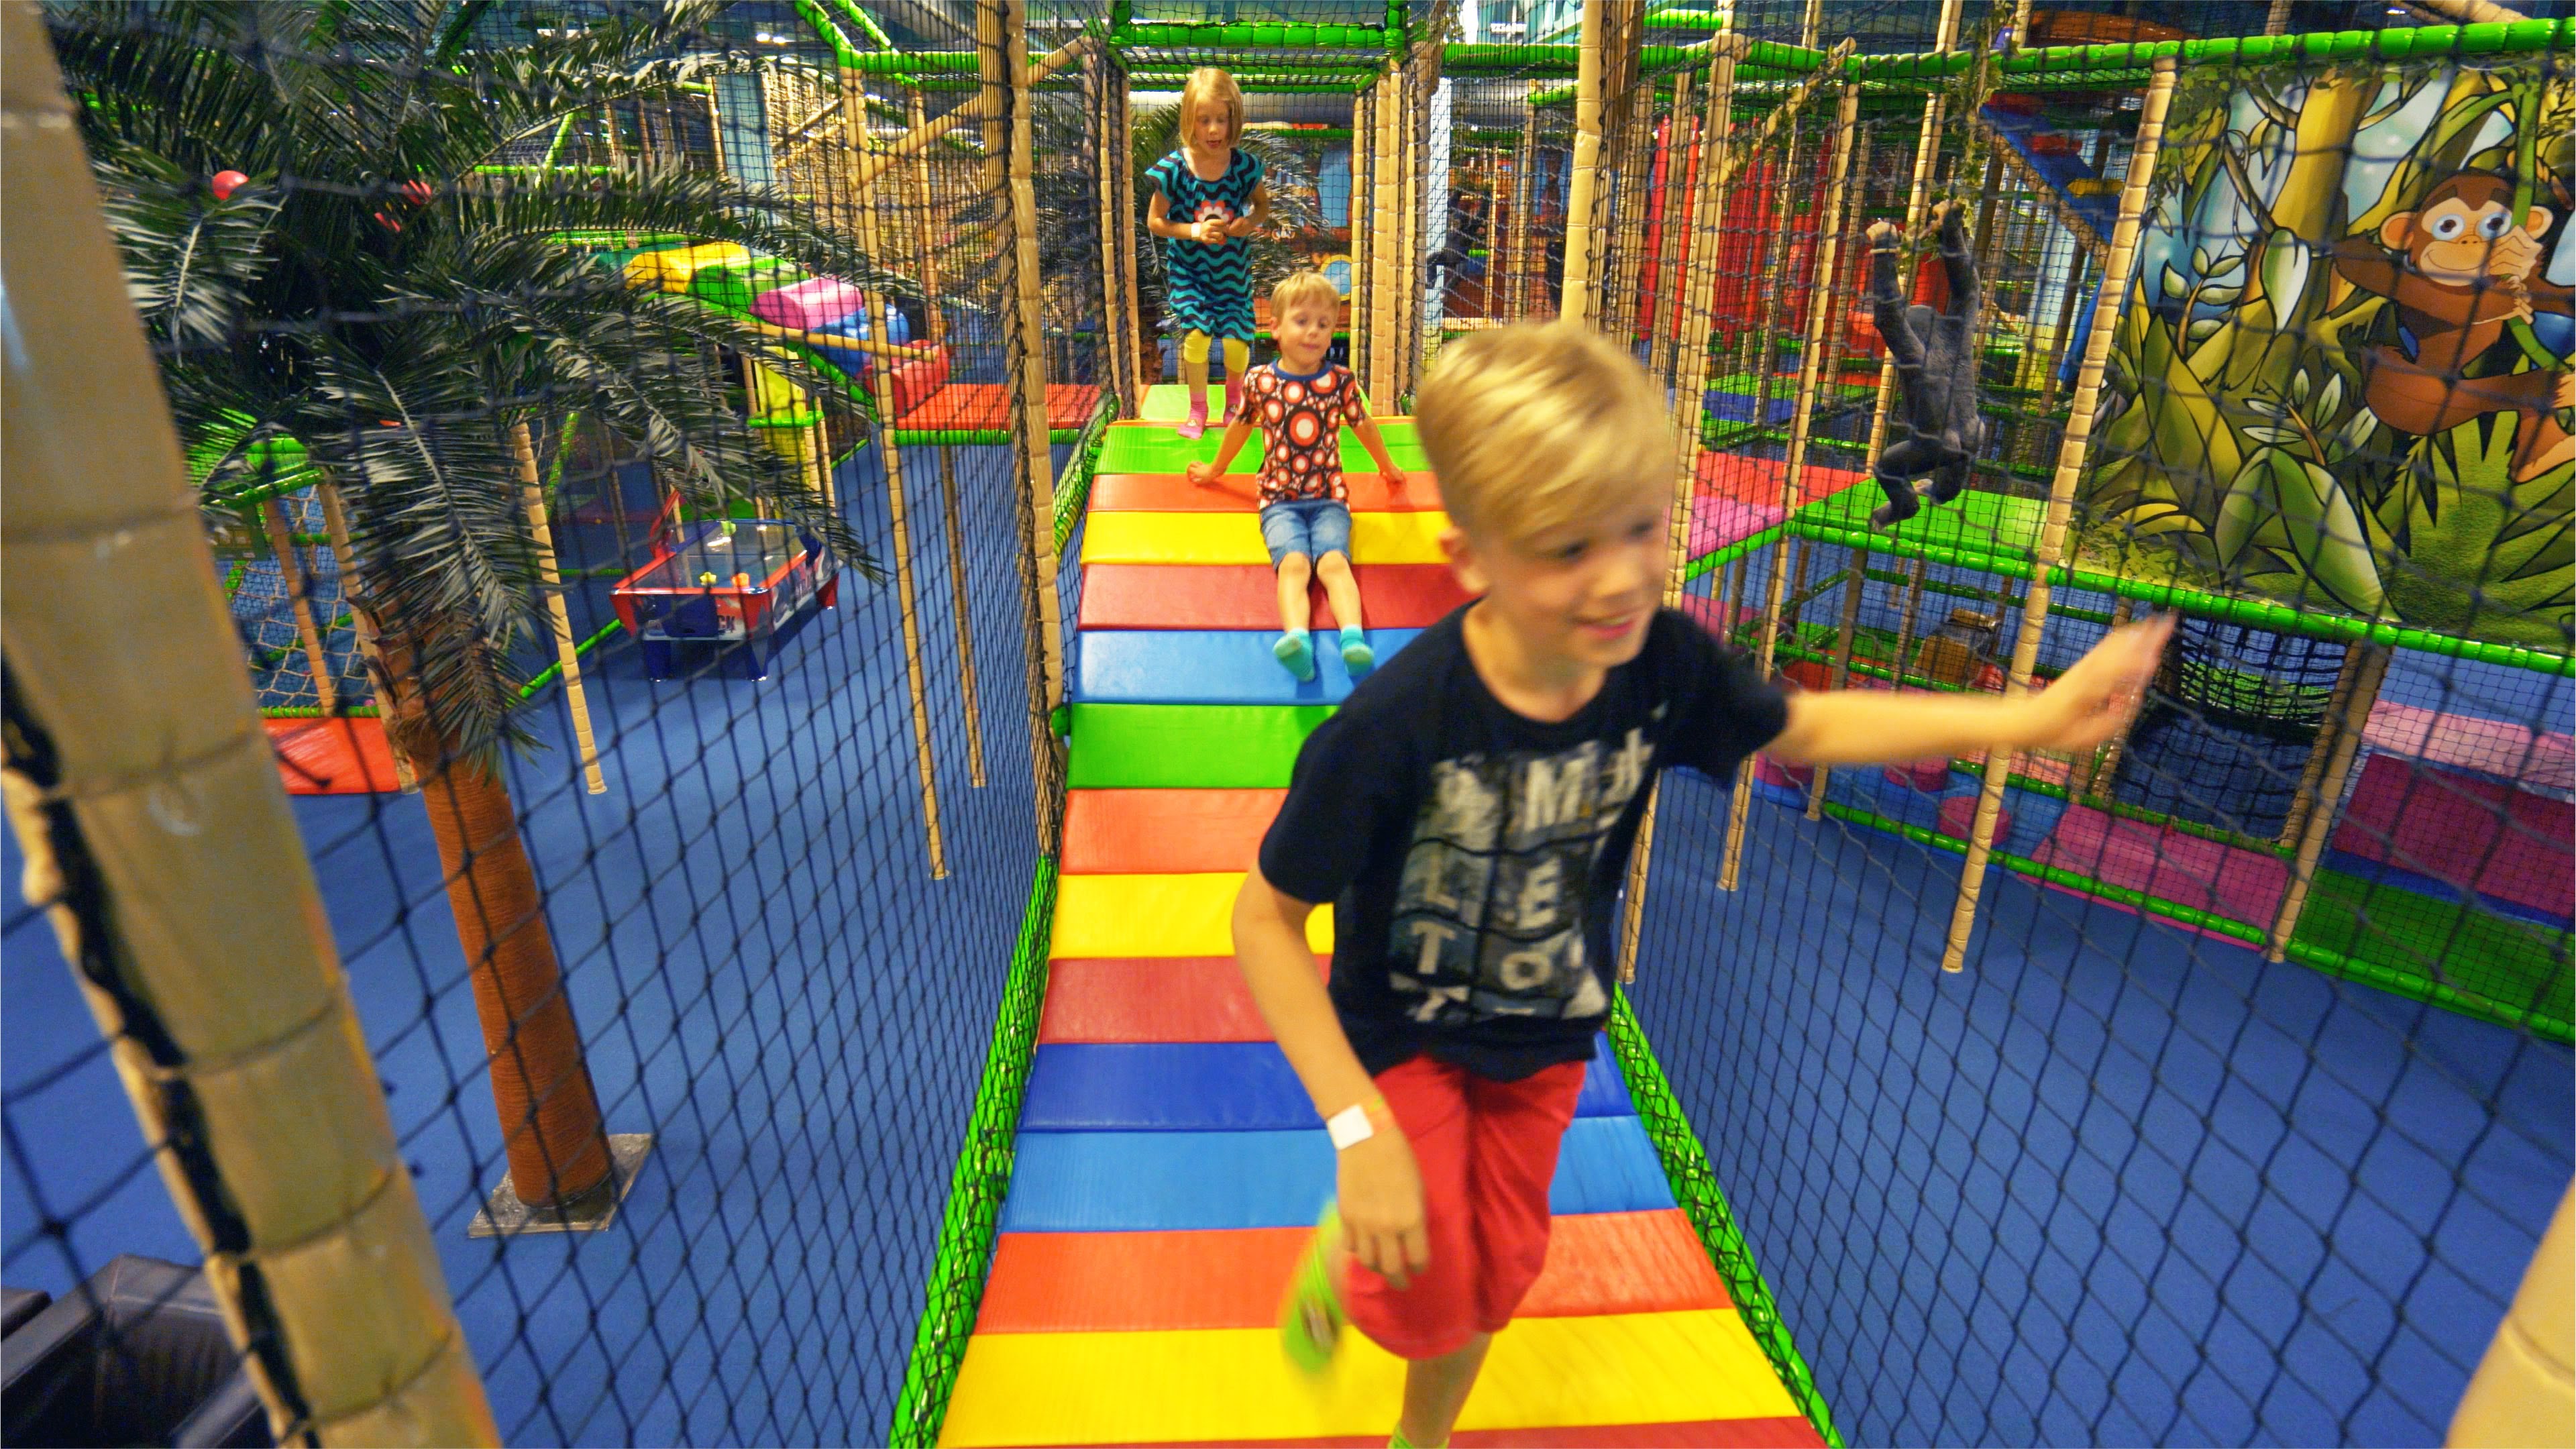 Fun Indoor Playground for Family and Kids at Leo's Lekland - YouTube